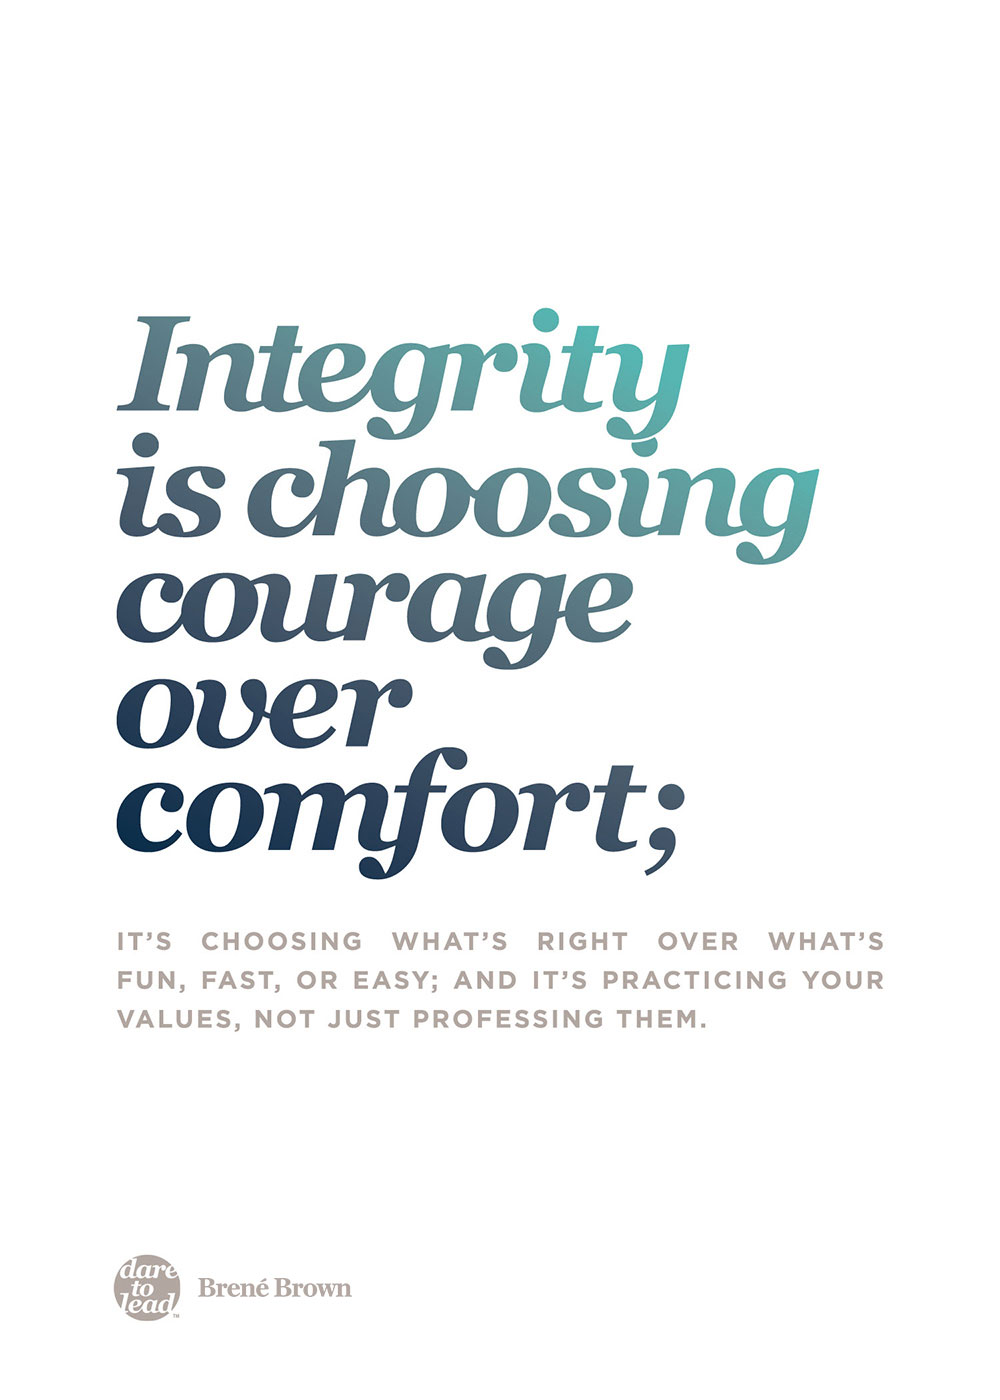 Integrity is choosing courage over comfort; it's choosing what's right over what's fun, fast, or easy, and it's practicing your values, not just professing them. - Brené Brown